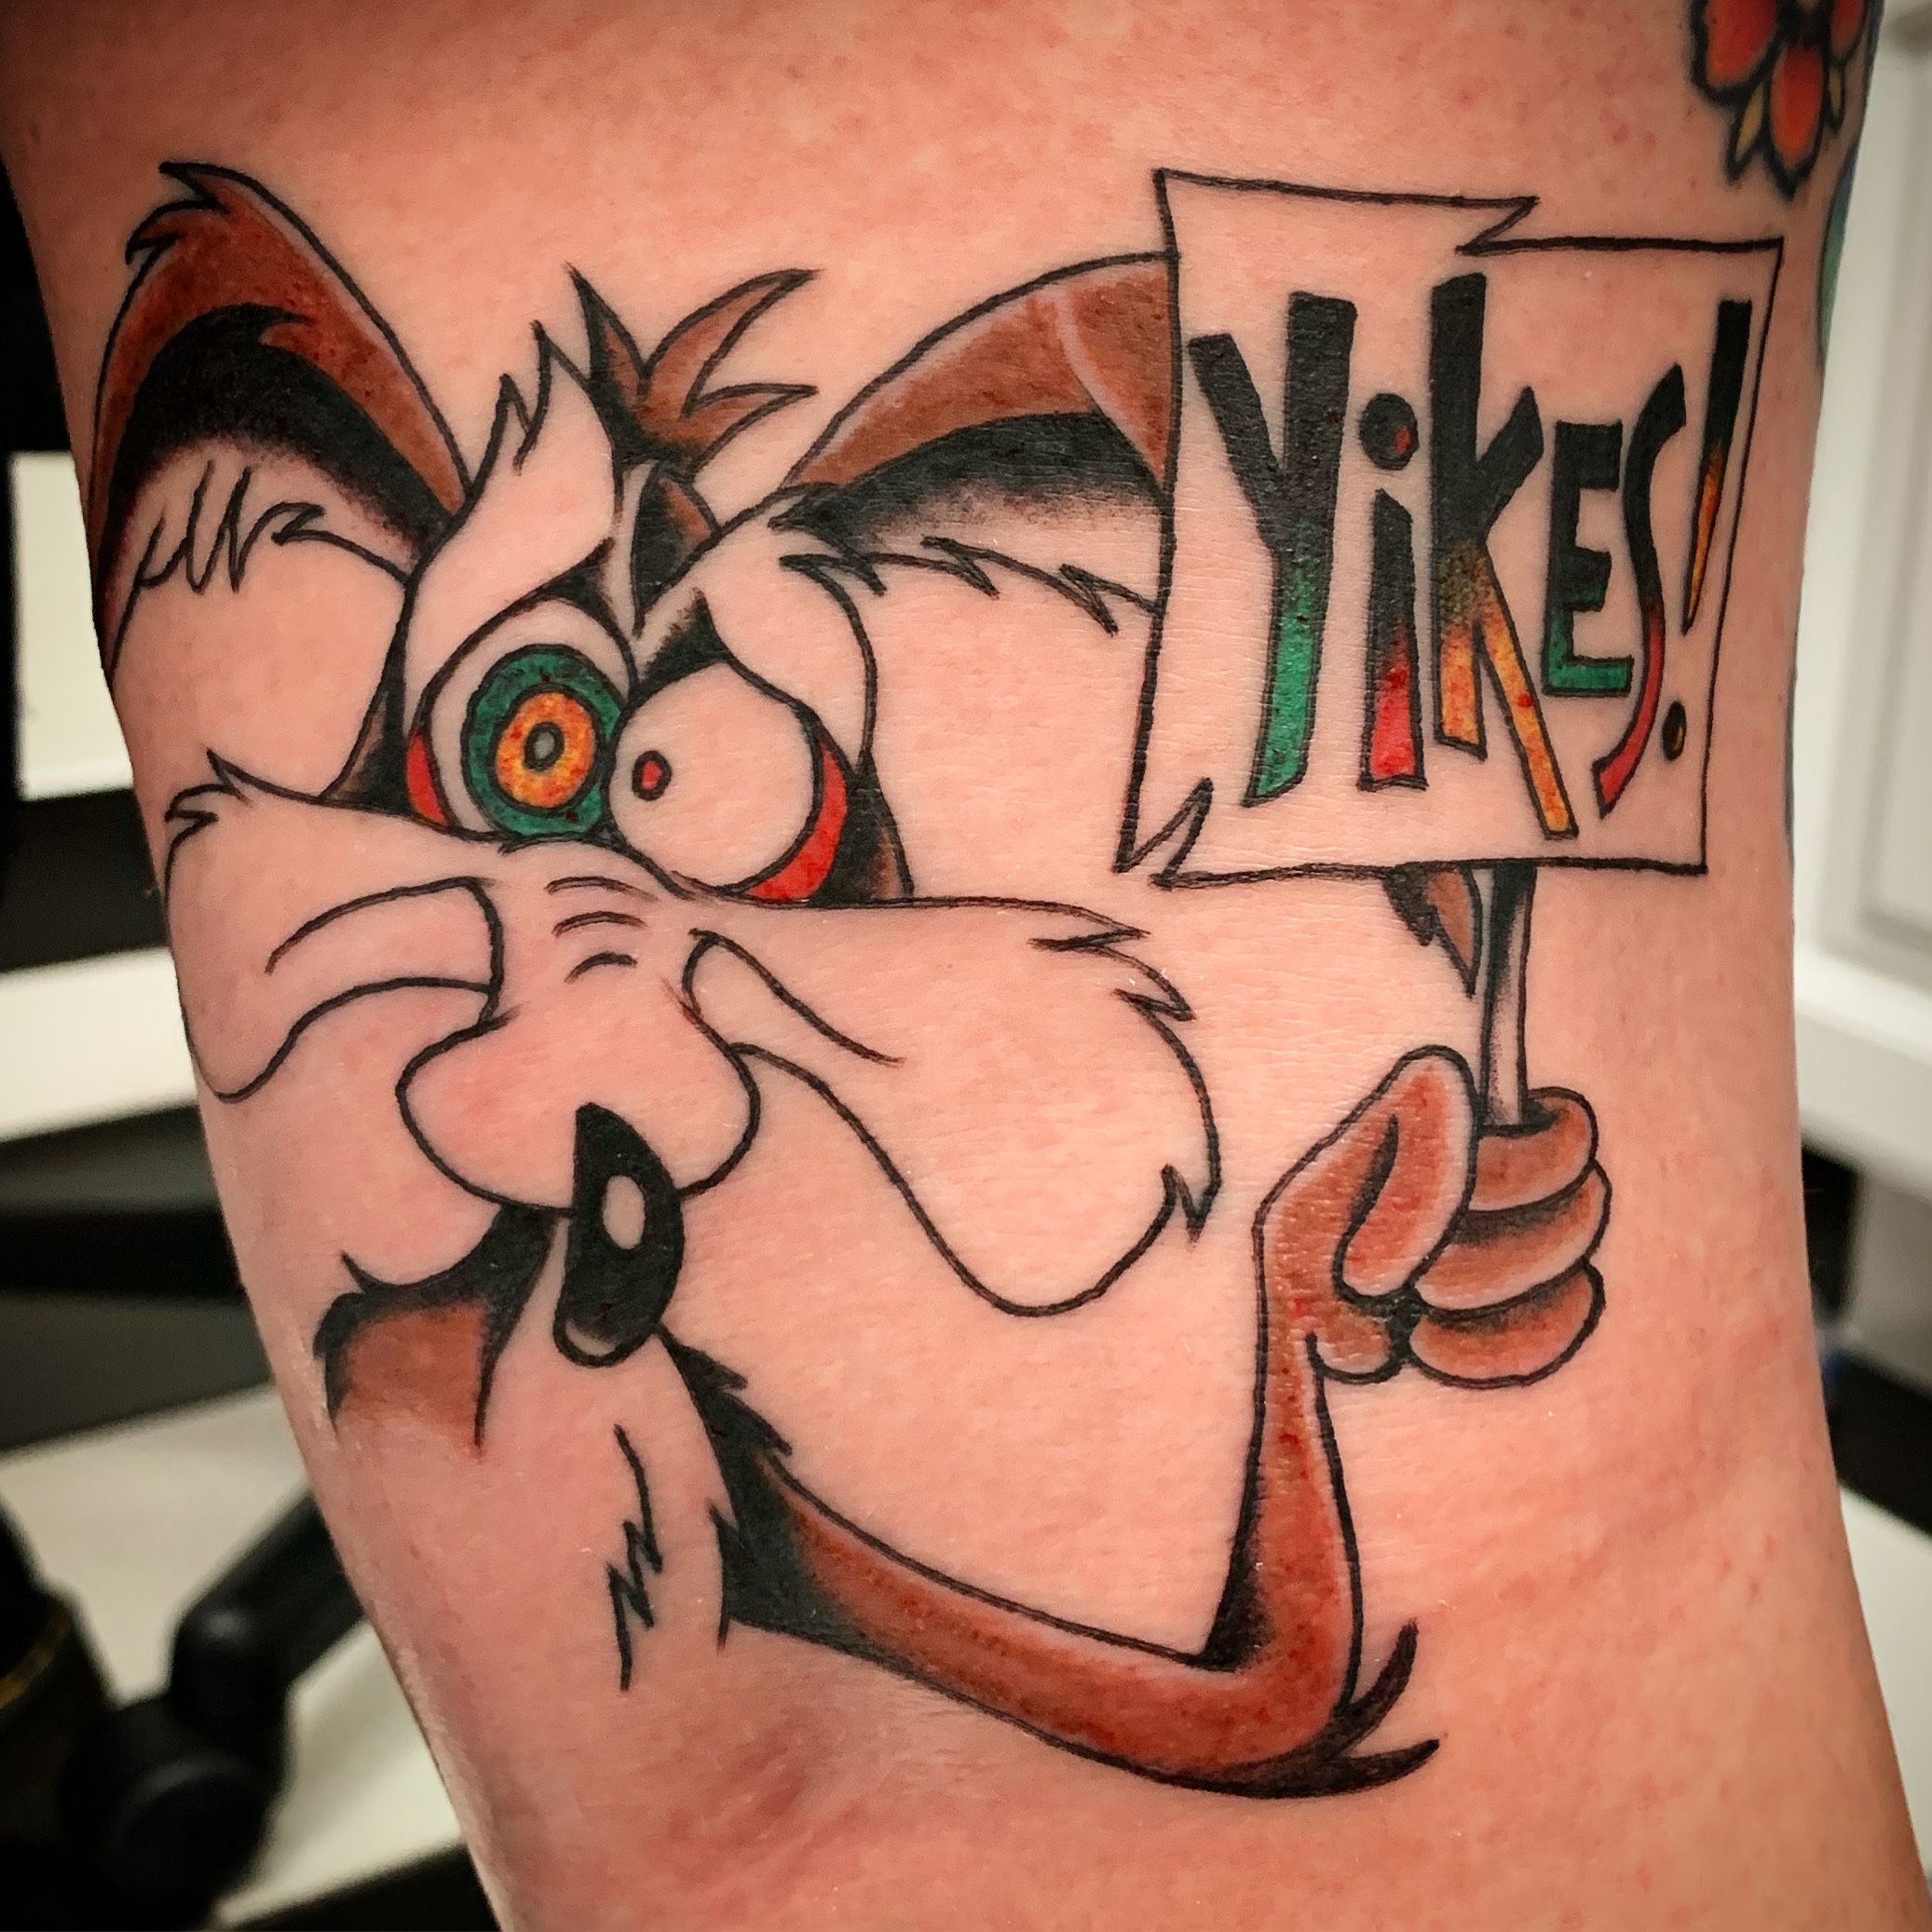 Coyote tattoo by Uncl Paul Knows  Post 29251